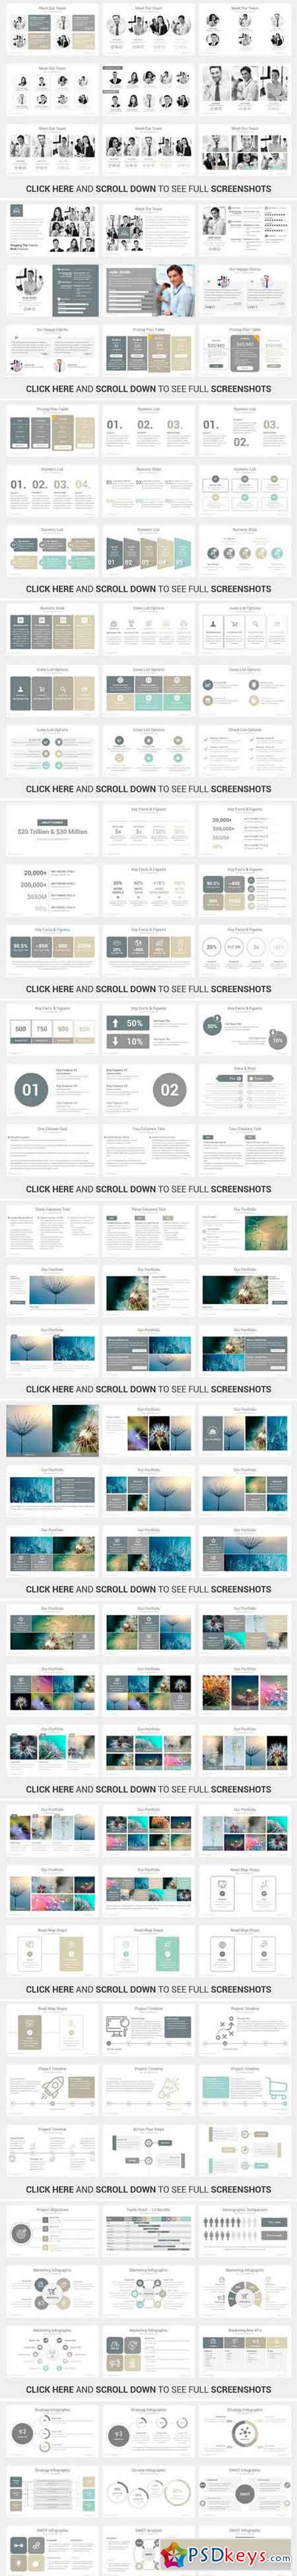 Simplicity PowerPoint 2380048